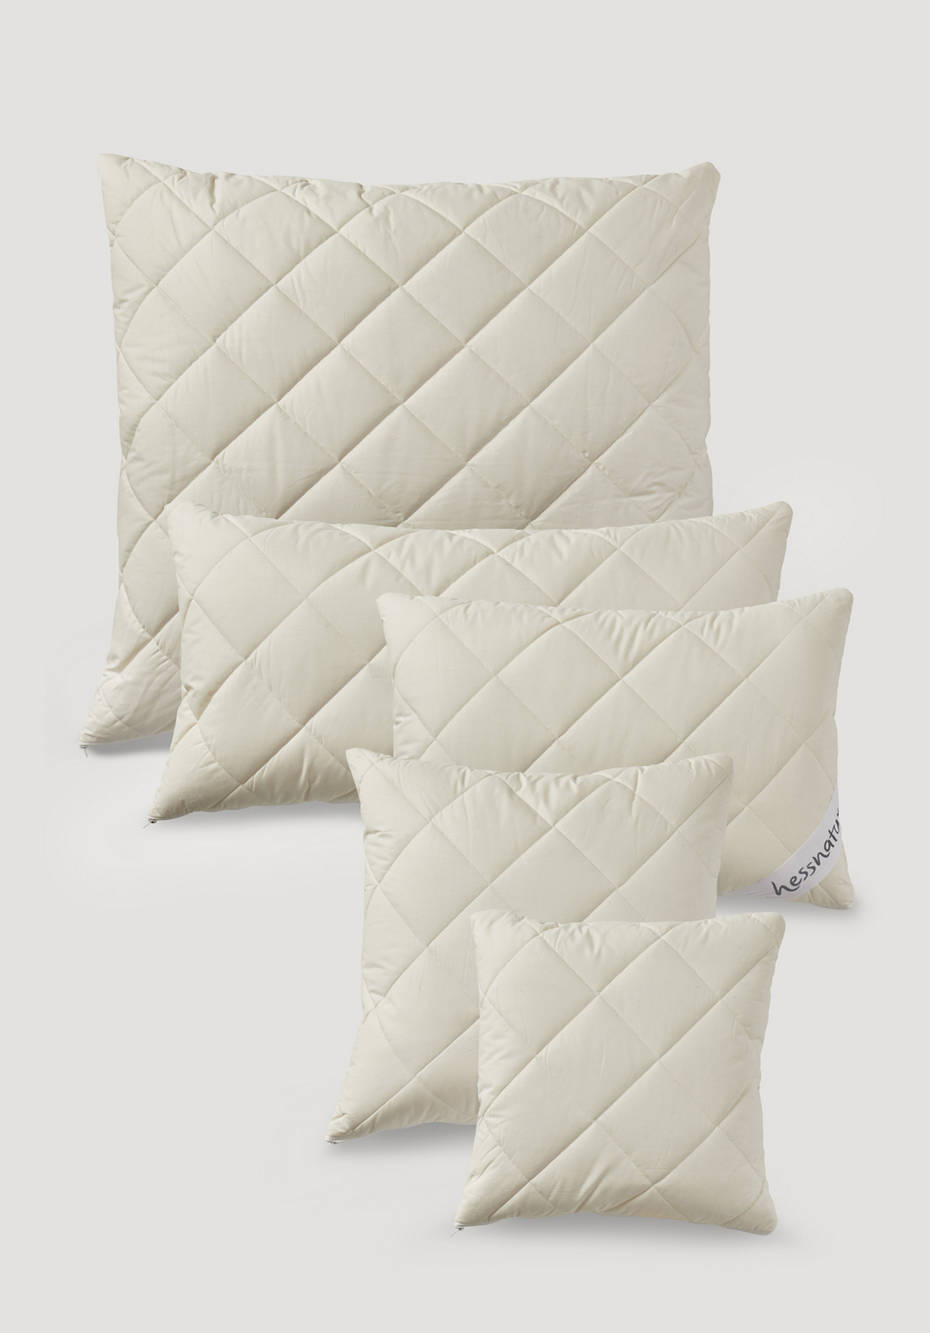 Pillows made from pure organic cotton